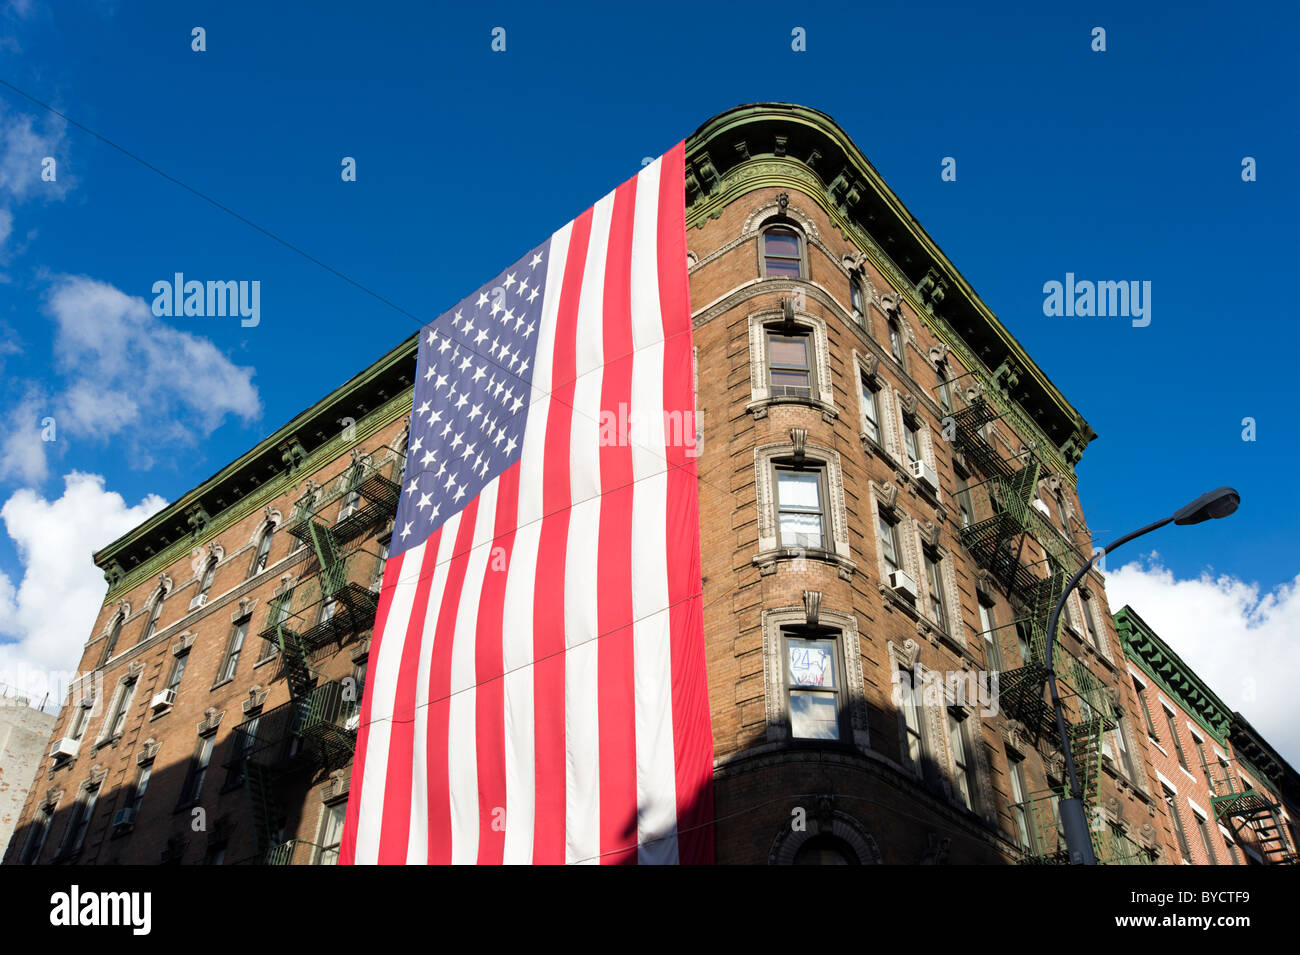 Stars and stripes American flag draped over side of a building, New York City, USA Stock Photo